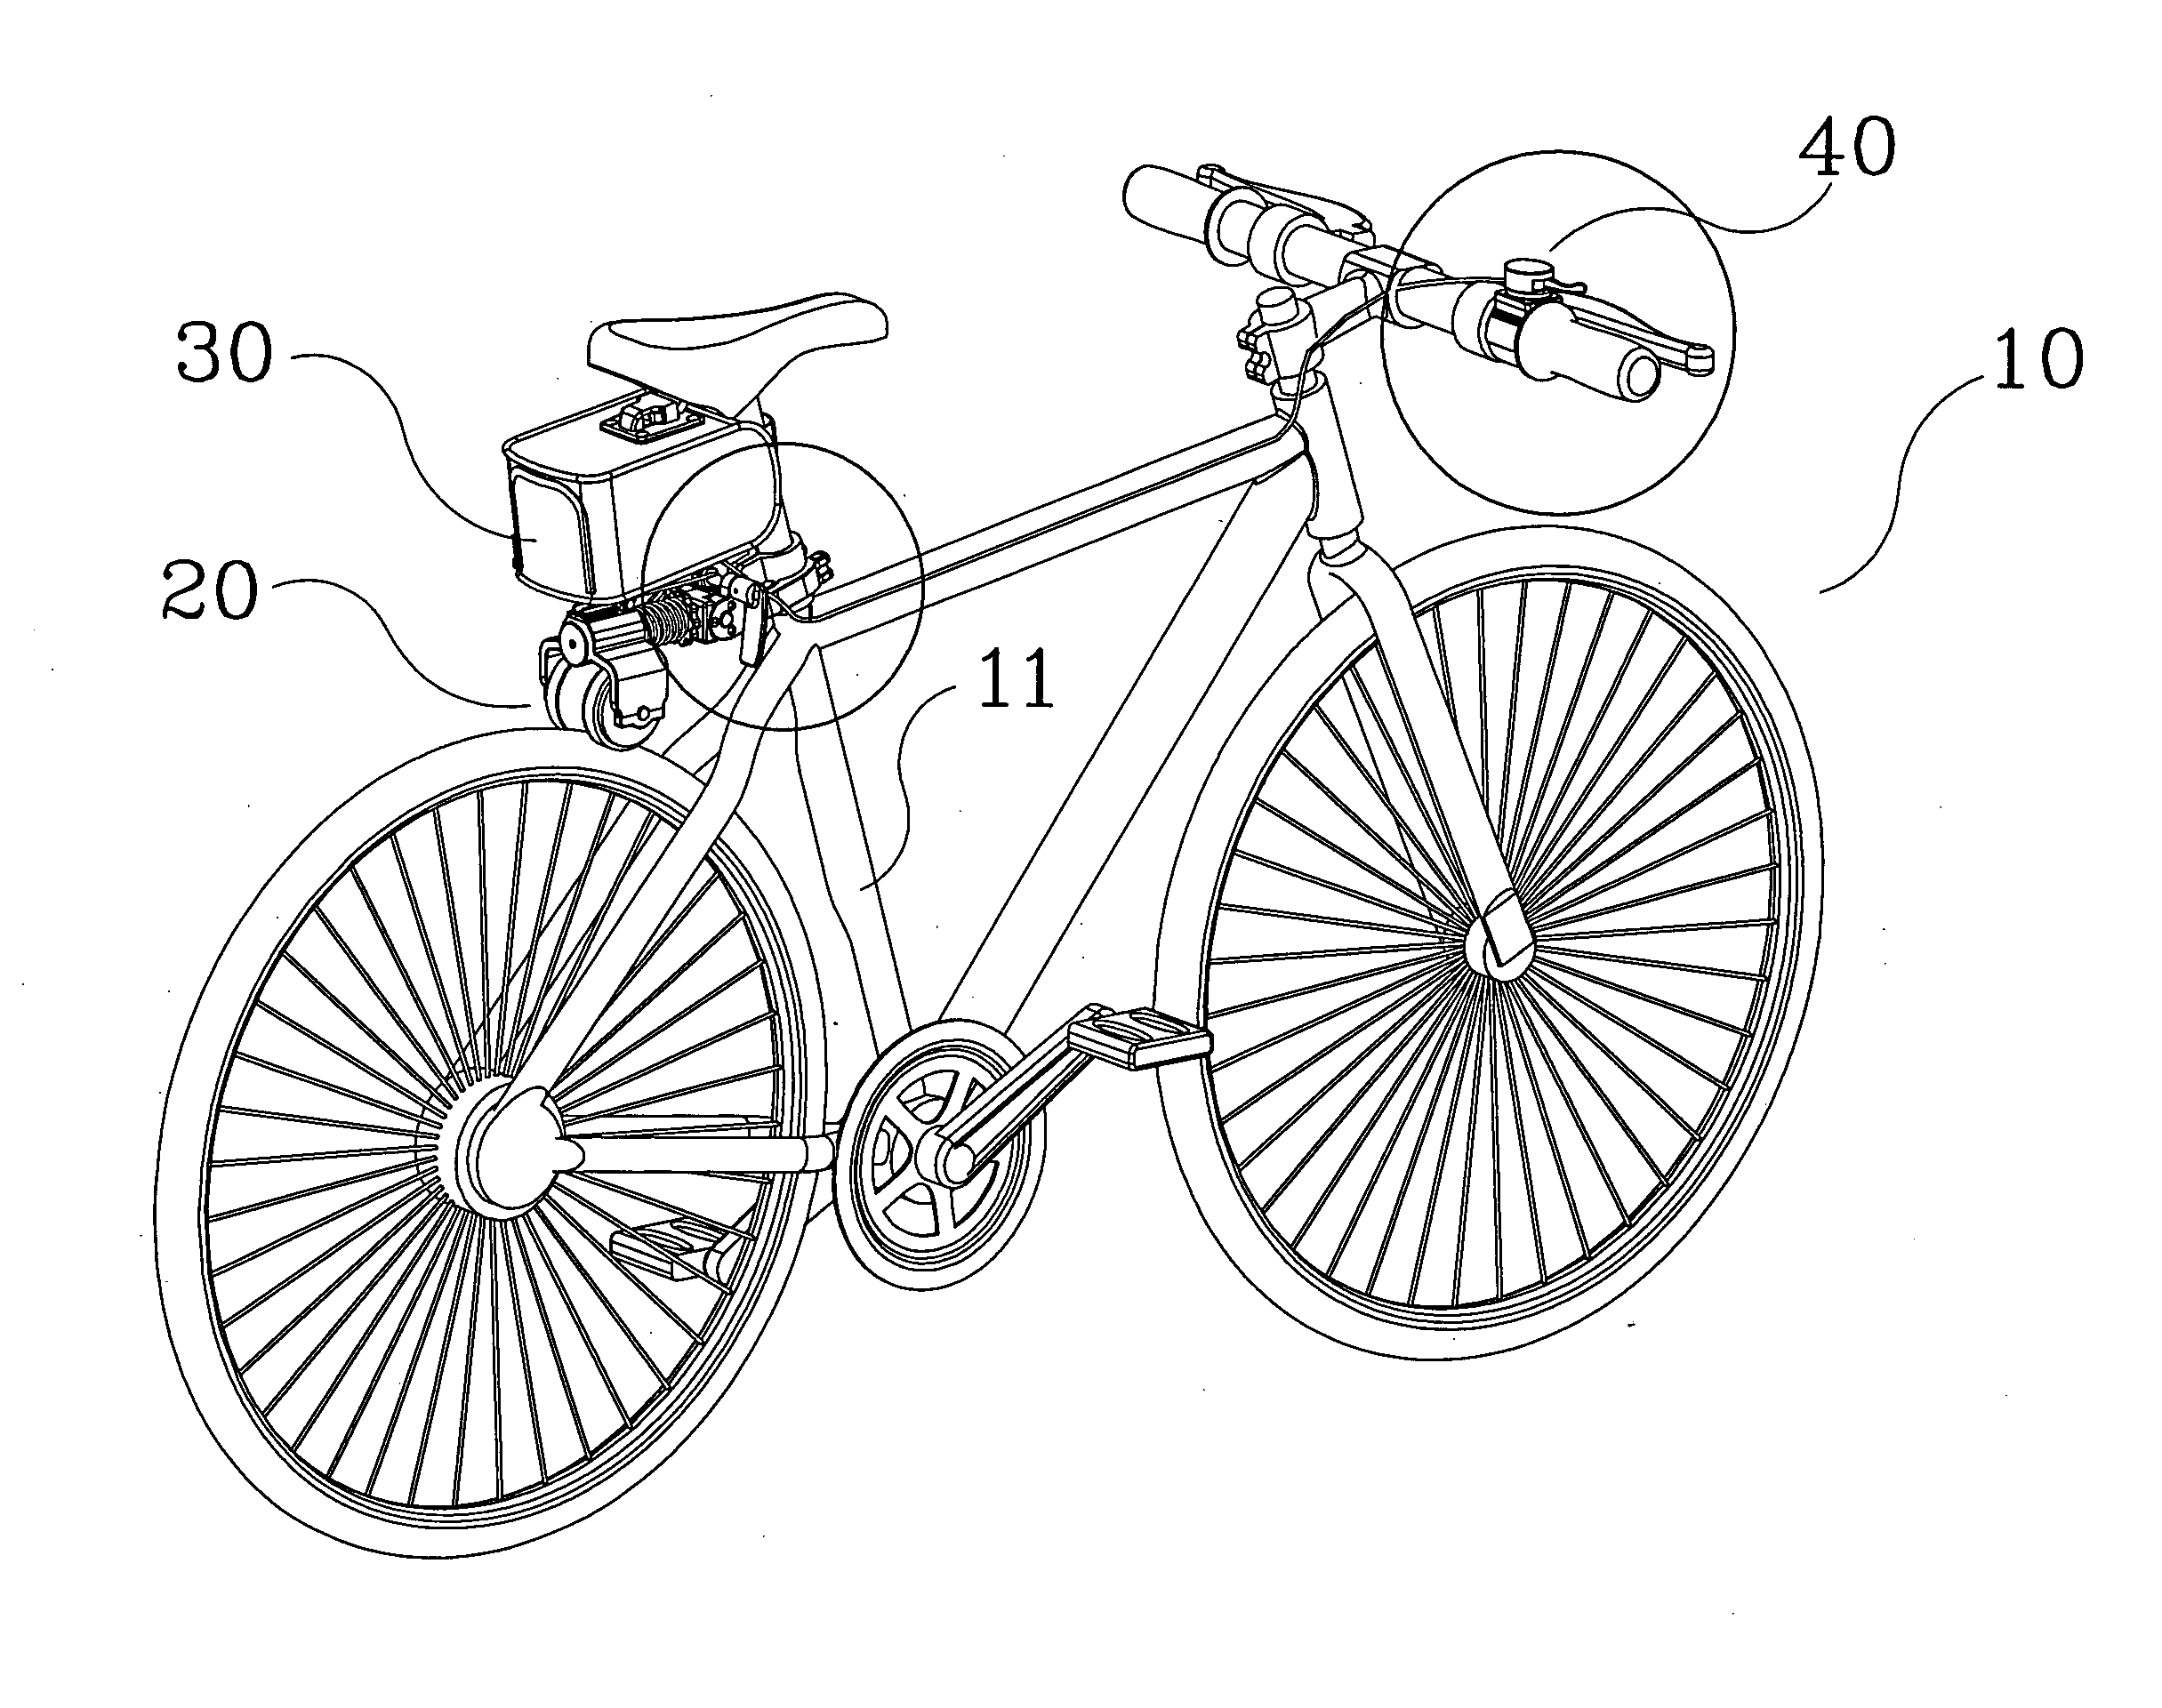 Bicycle-running assistant system